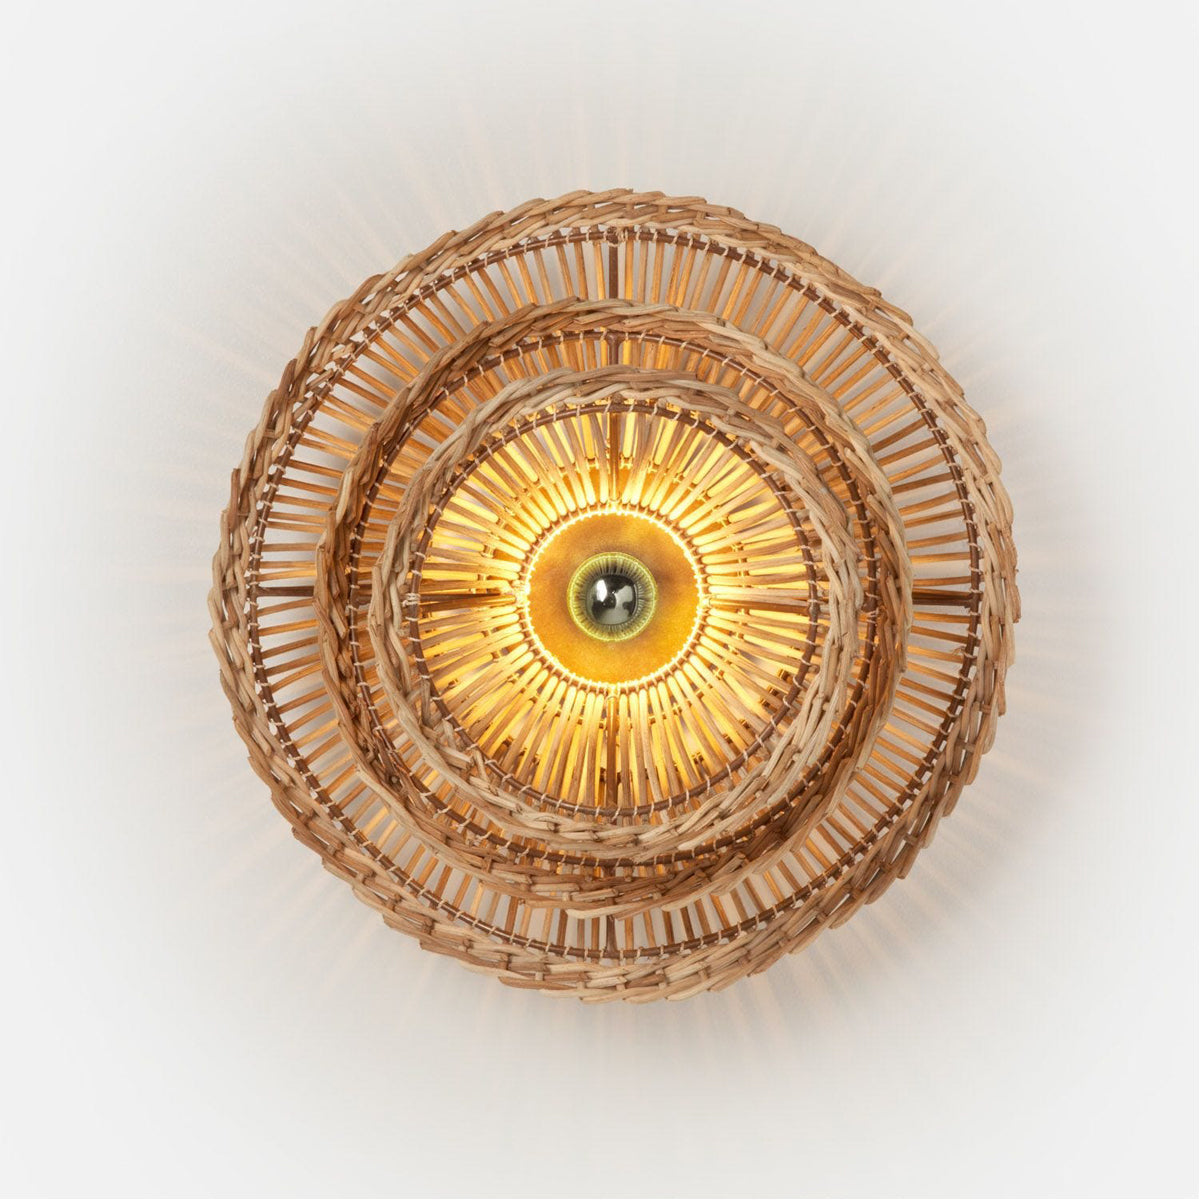 Made Goods Alondra Layered Rattan Floral Sconce